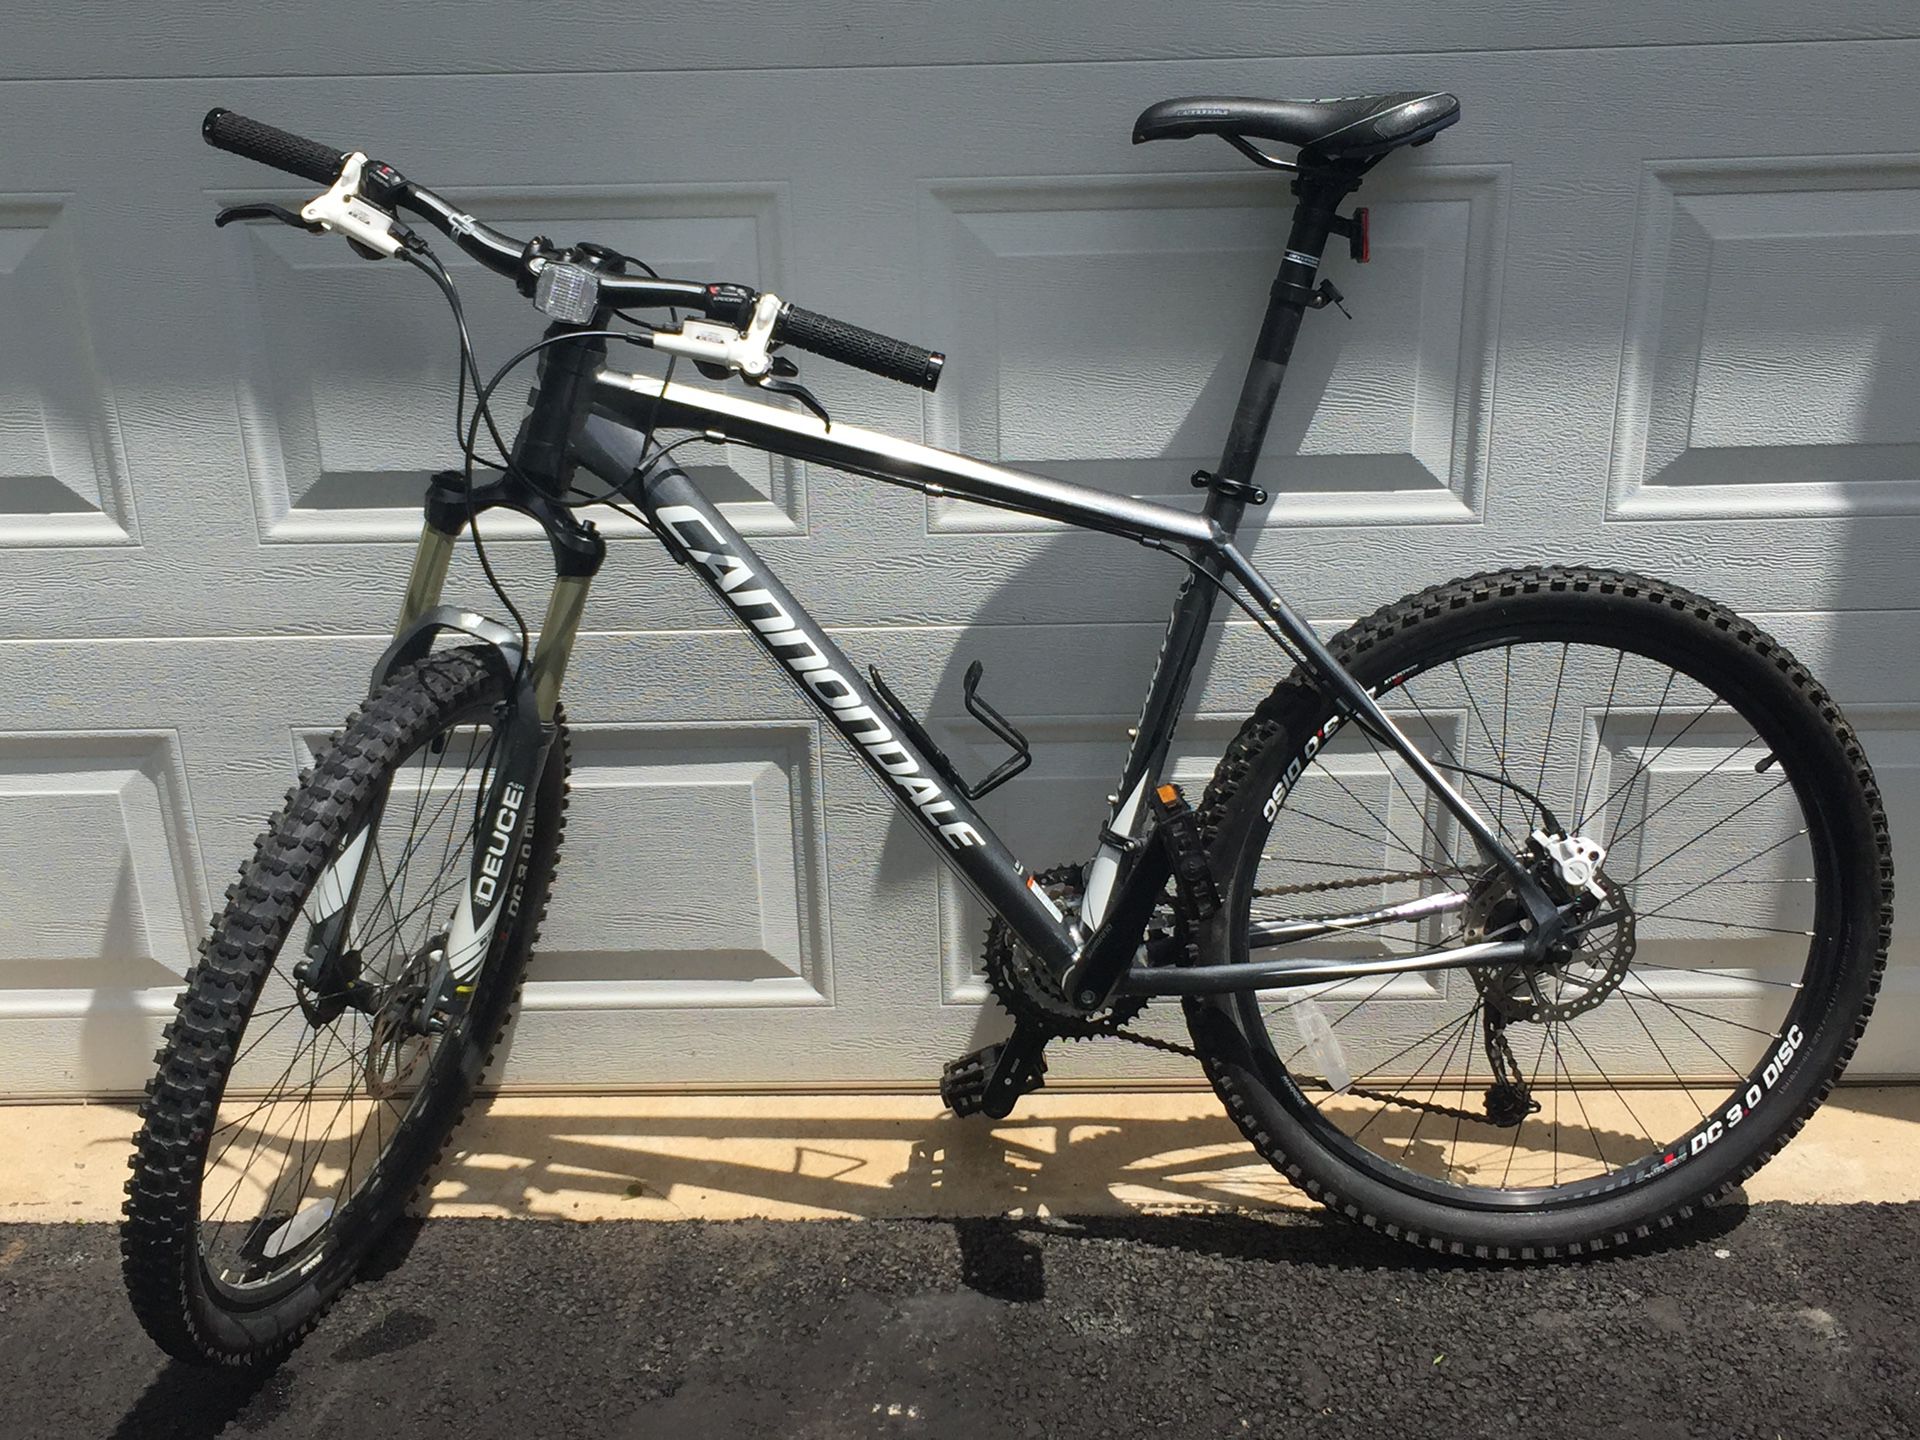 Cannondale Mountain Bike, low miles, like new, many upgrades. $350. Large frame, wheels 54 centimeters.